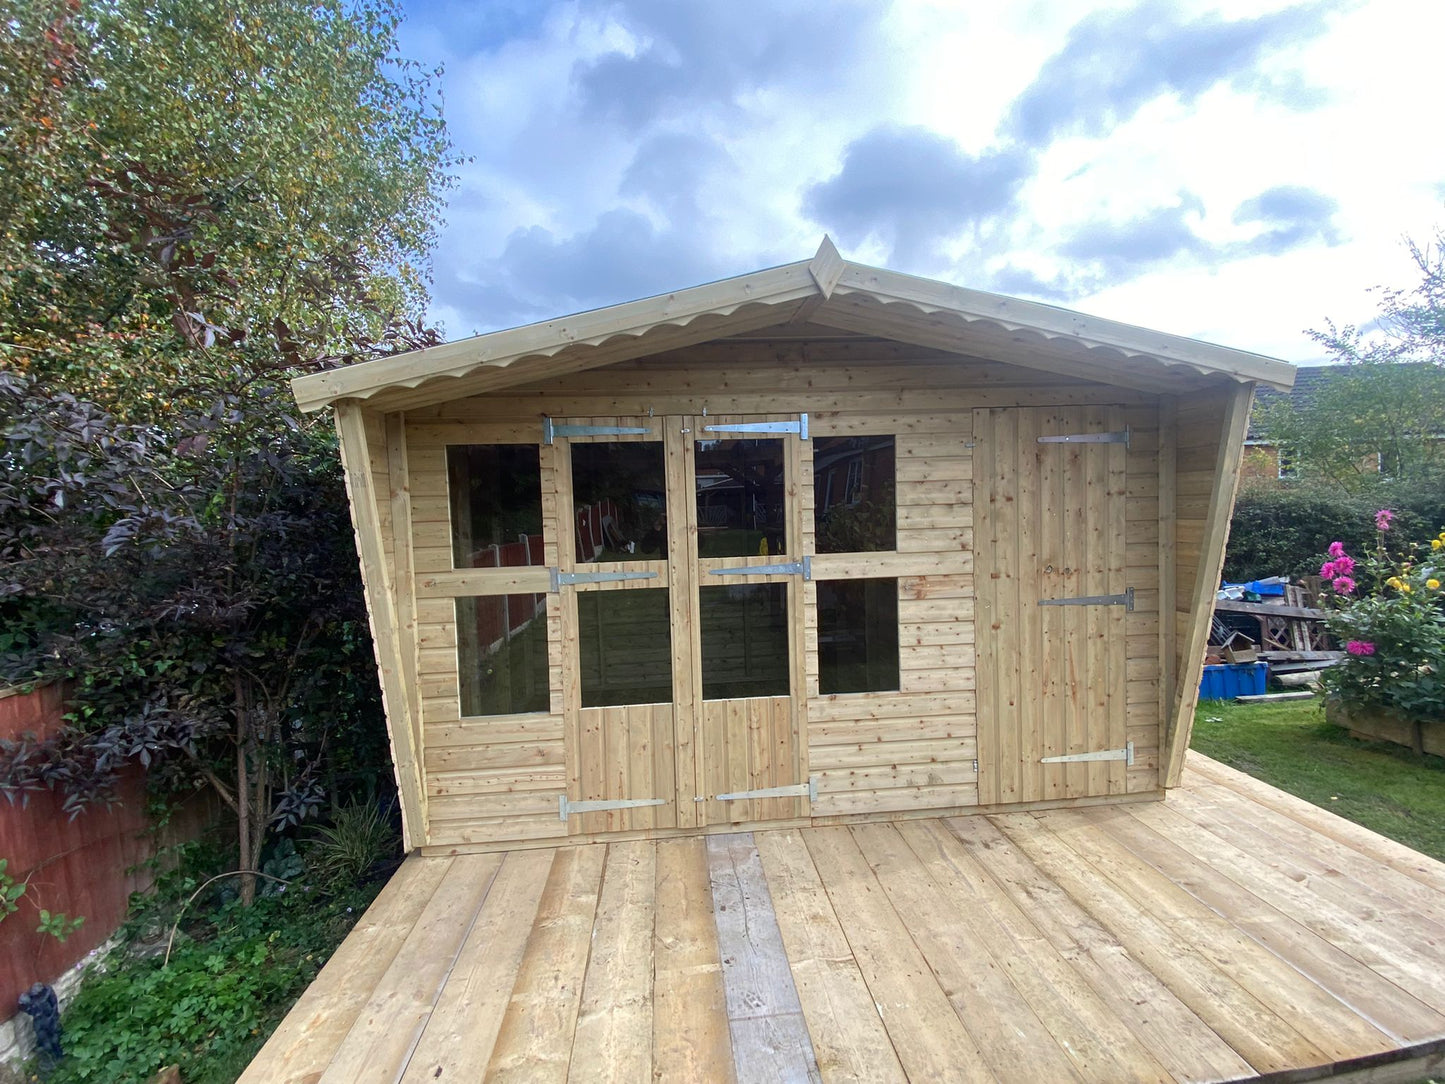 12x8 Tanalised Summerhouse/Shed Combination Building